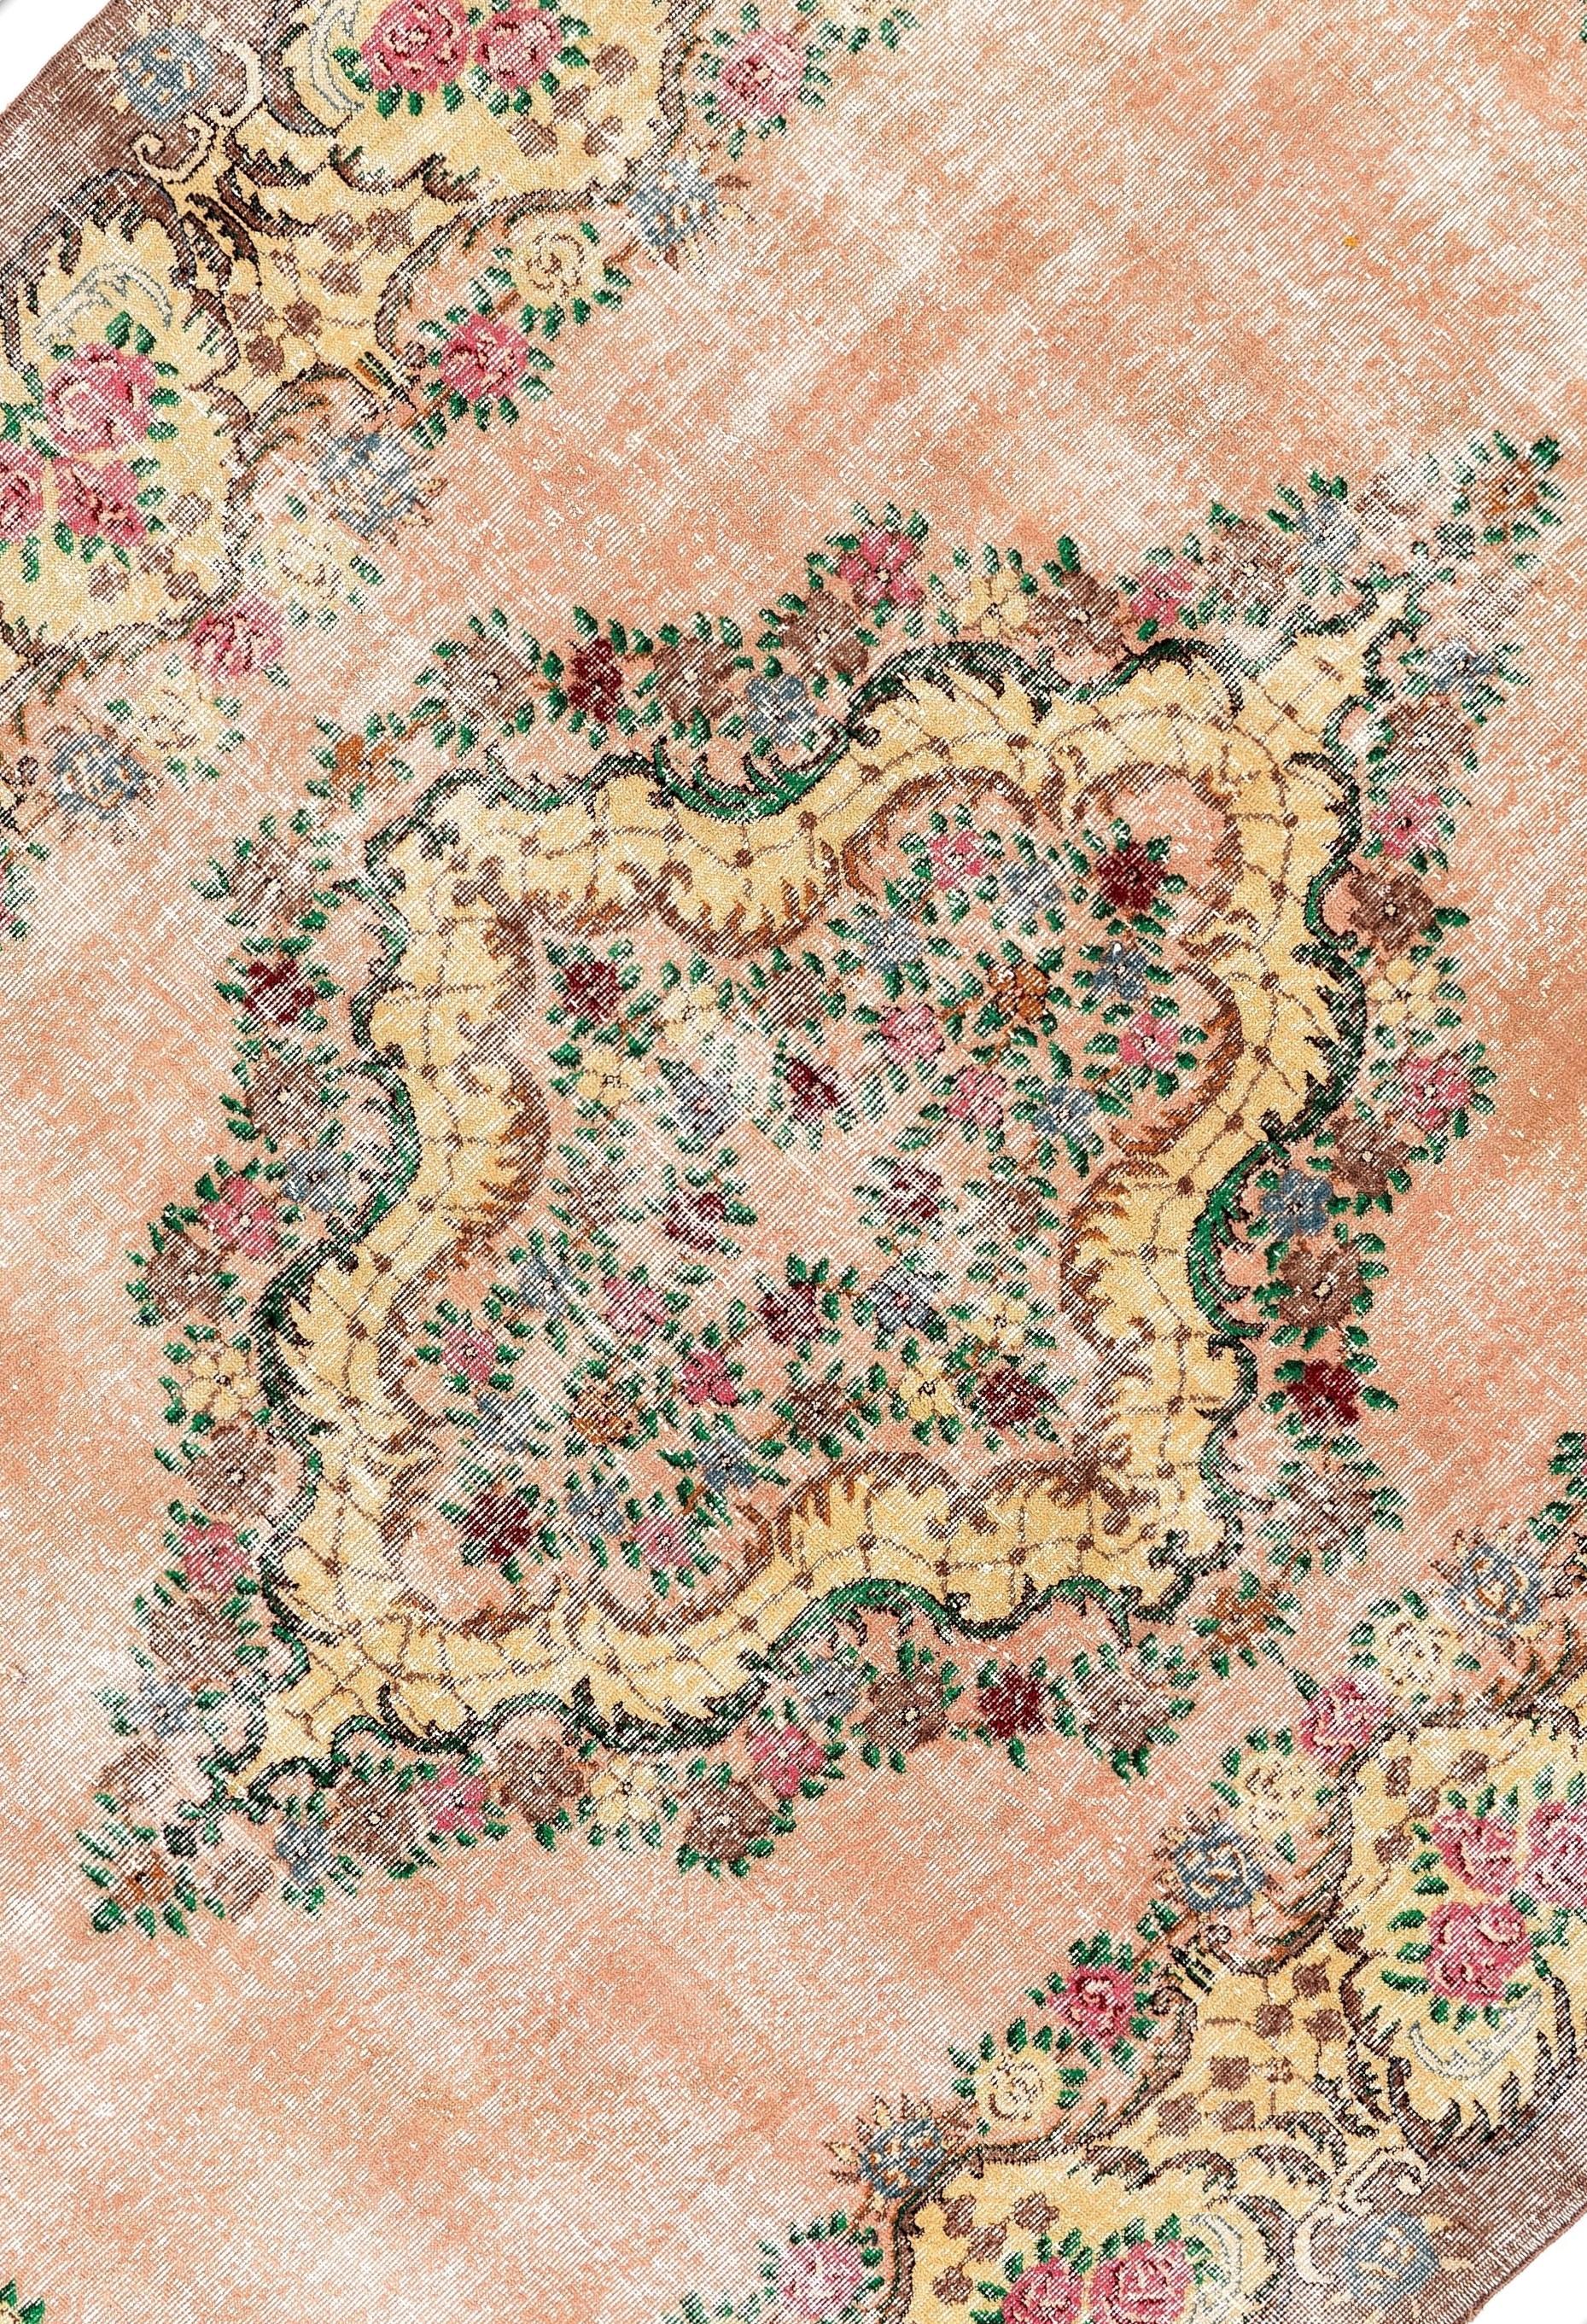 Hand-Woven Distressed Vintage Floral Ghiordes Rug, 7.4x11 Ft Traditional Handmade Carpet